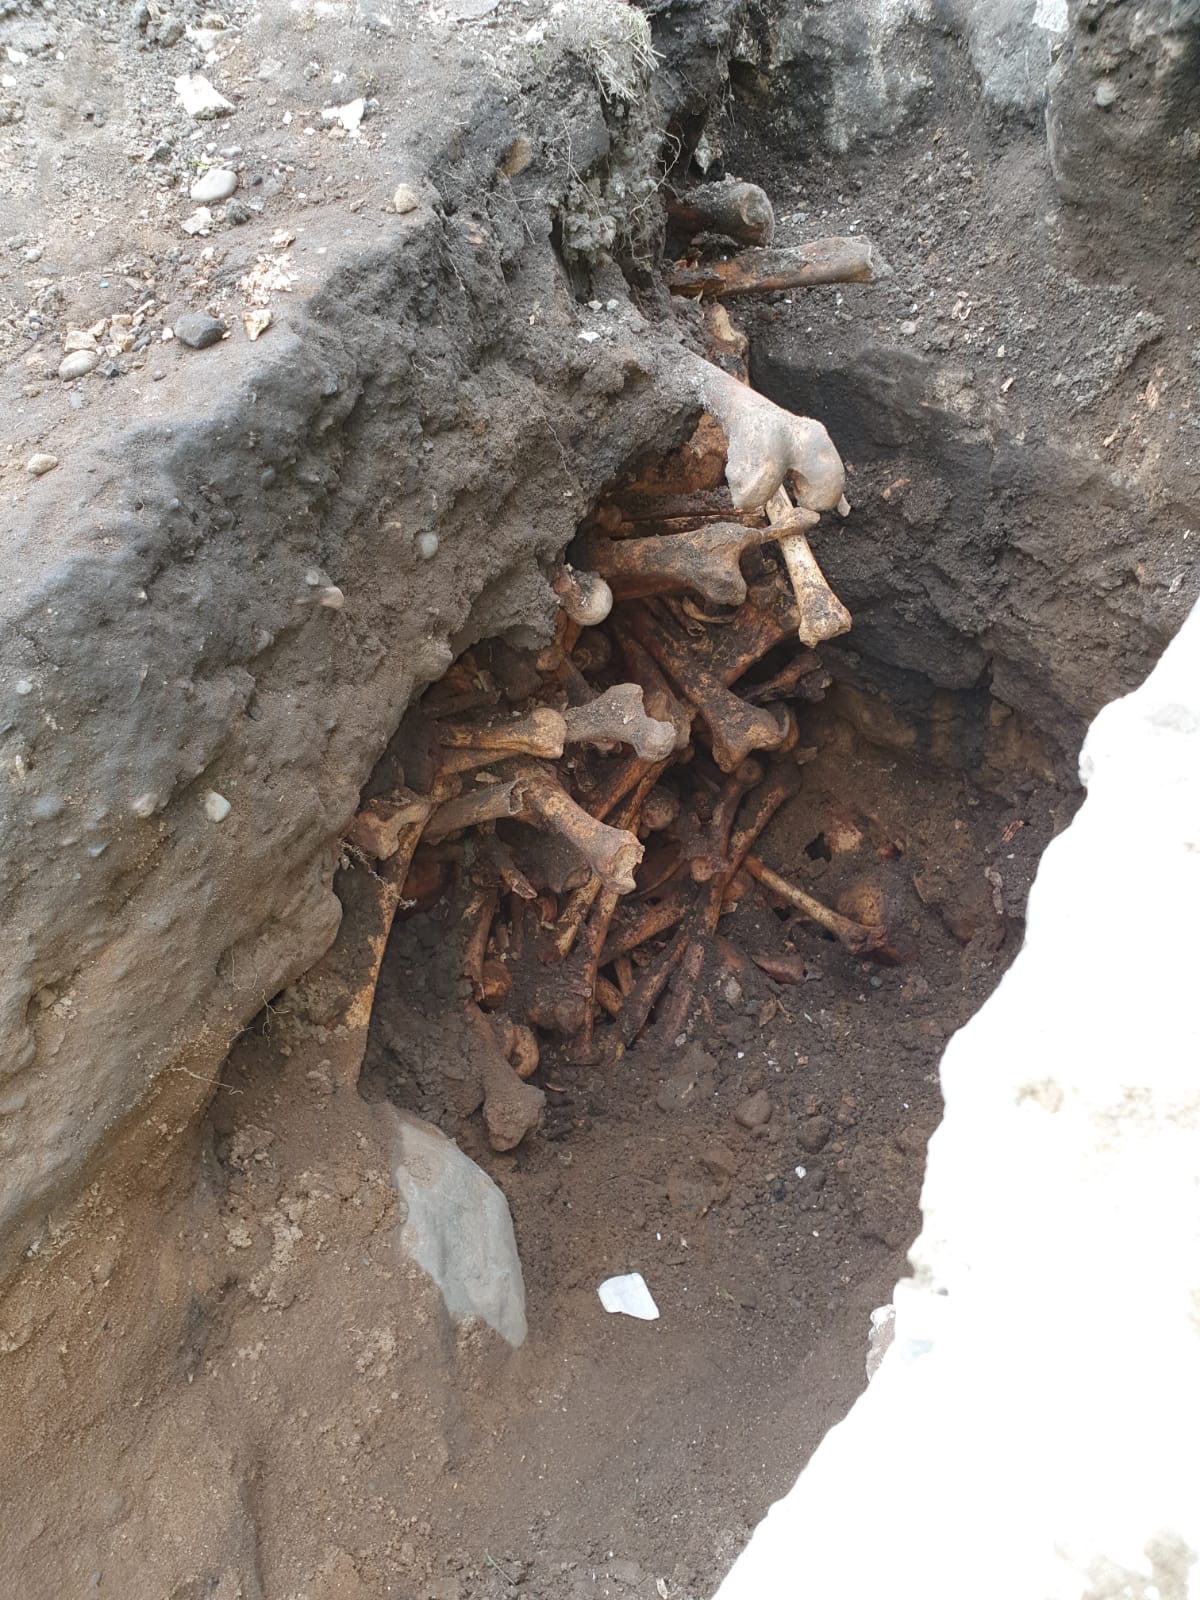 And finally... Rare whale bones uncovered in tram project excavations